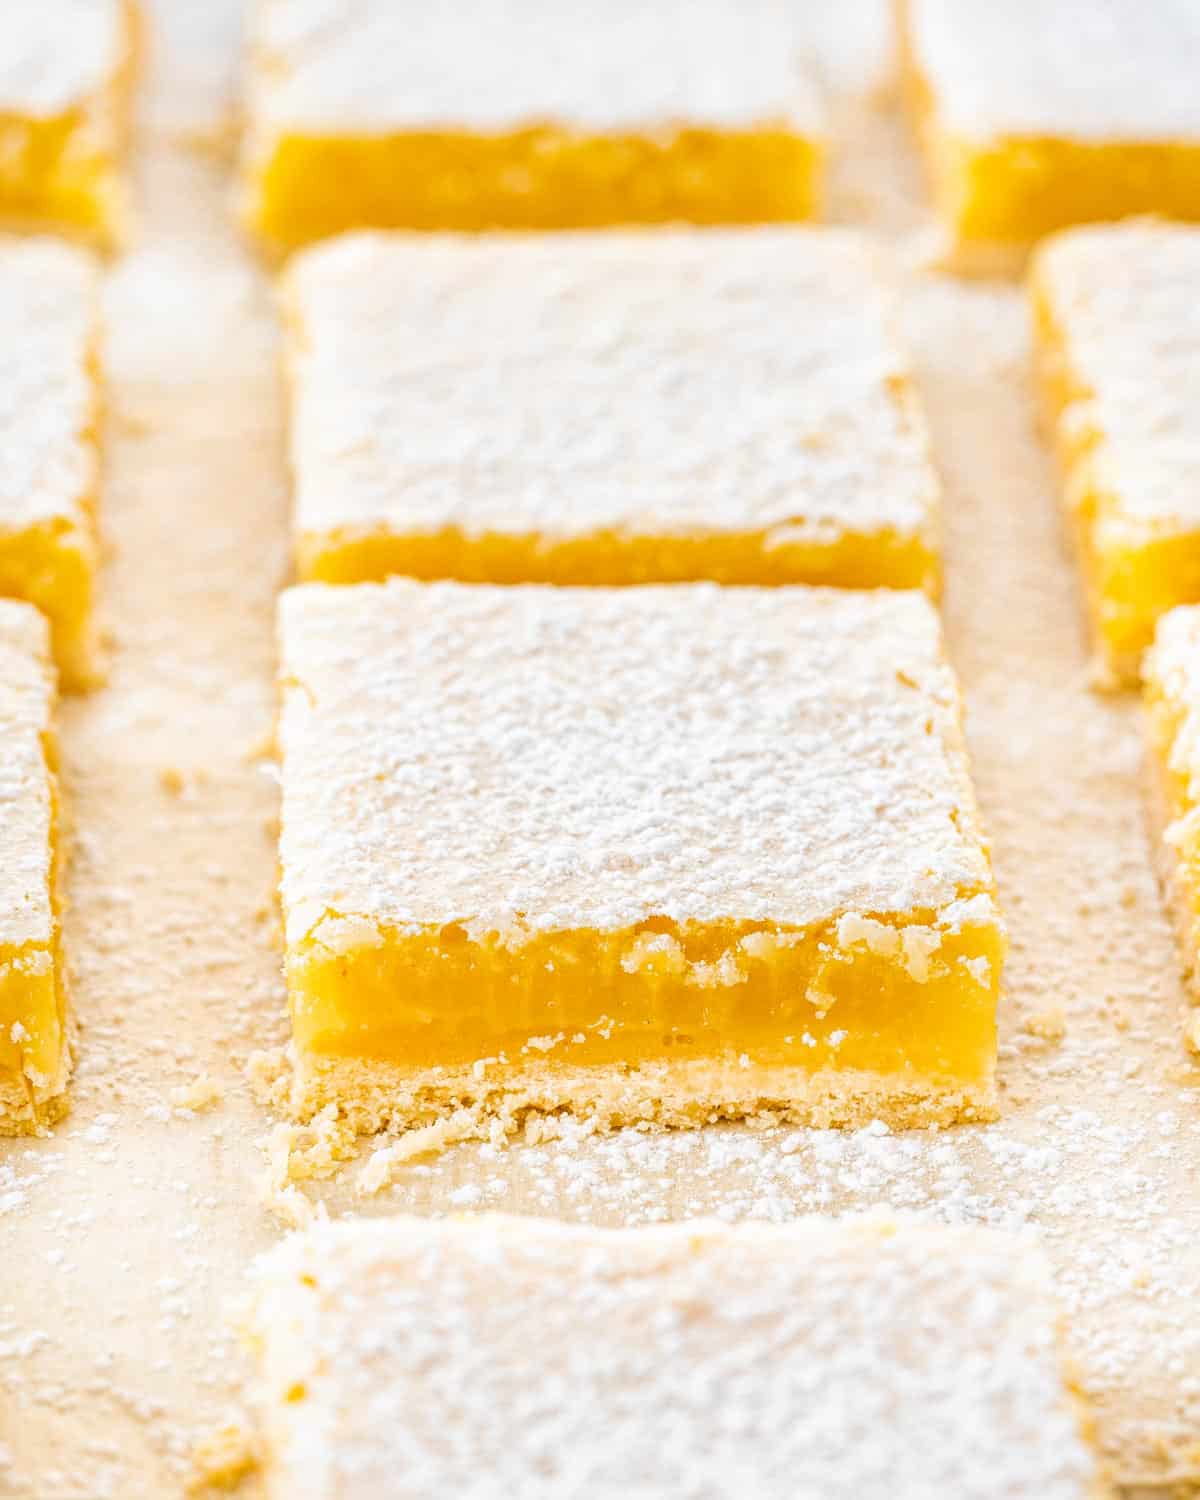 lemon bars cut into squares on parchment paper and dusted with icing sugar.